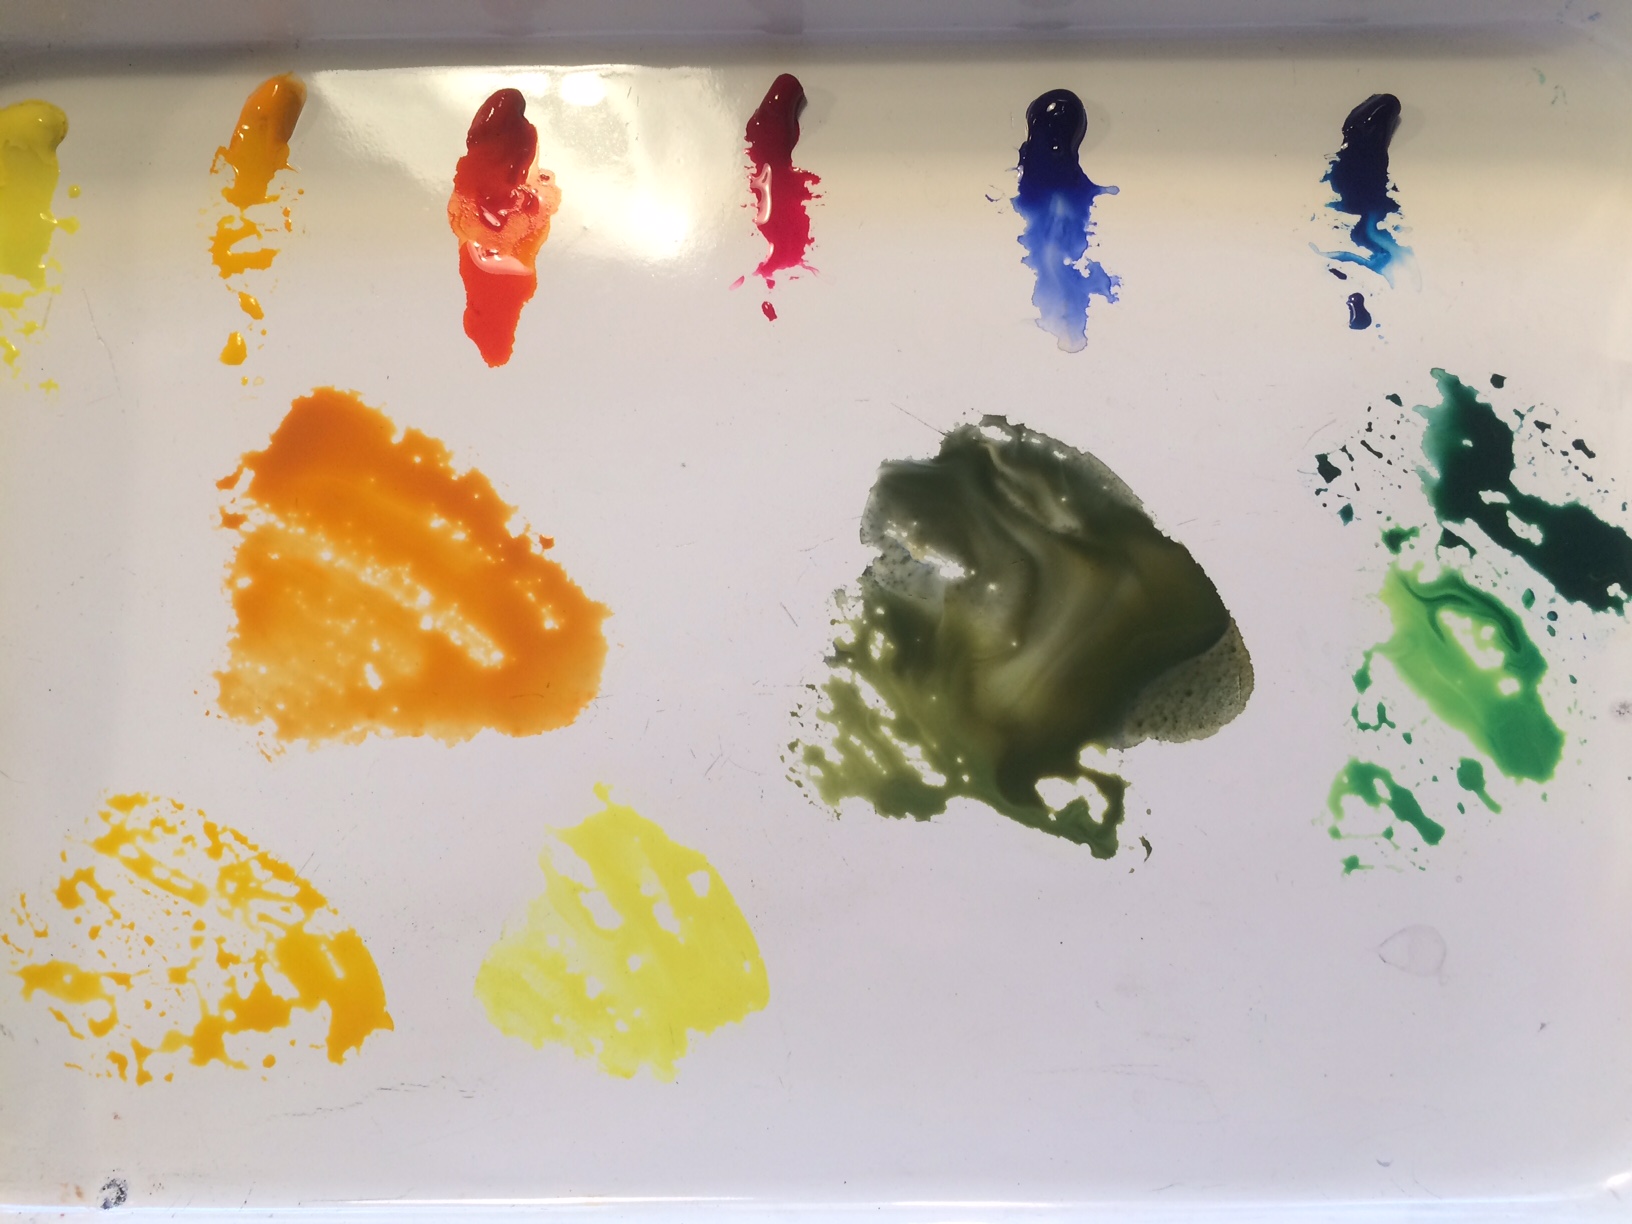 Mixing Watercolors on a Palette